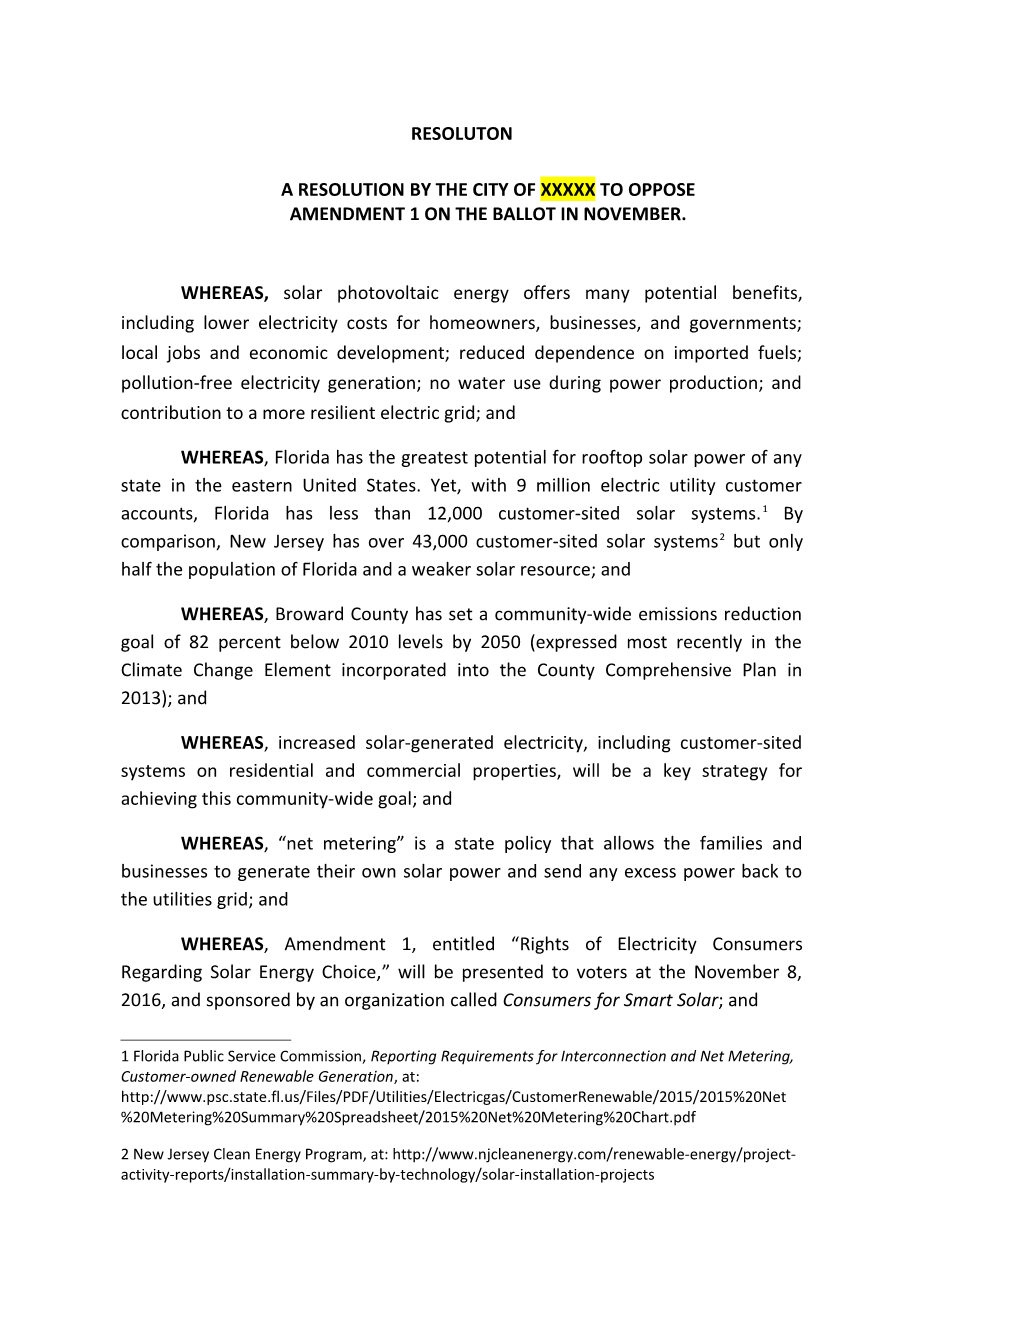 A Resolution by the City of Xxxxxto Oppose Amendment 1 on the Ballot in November